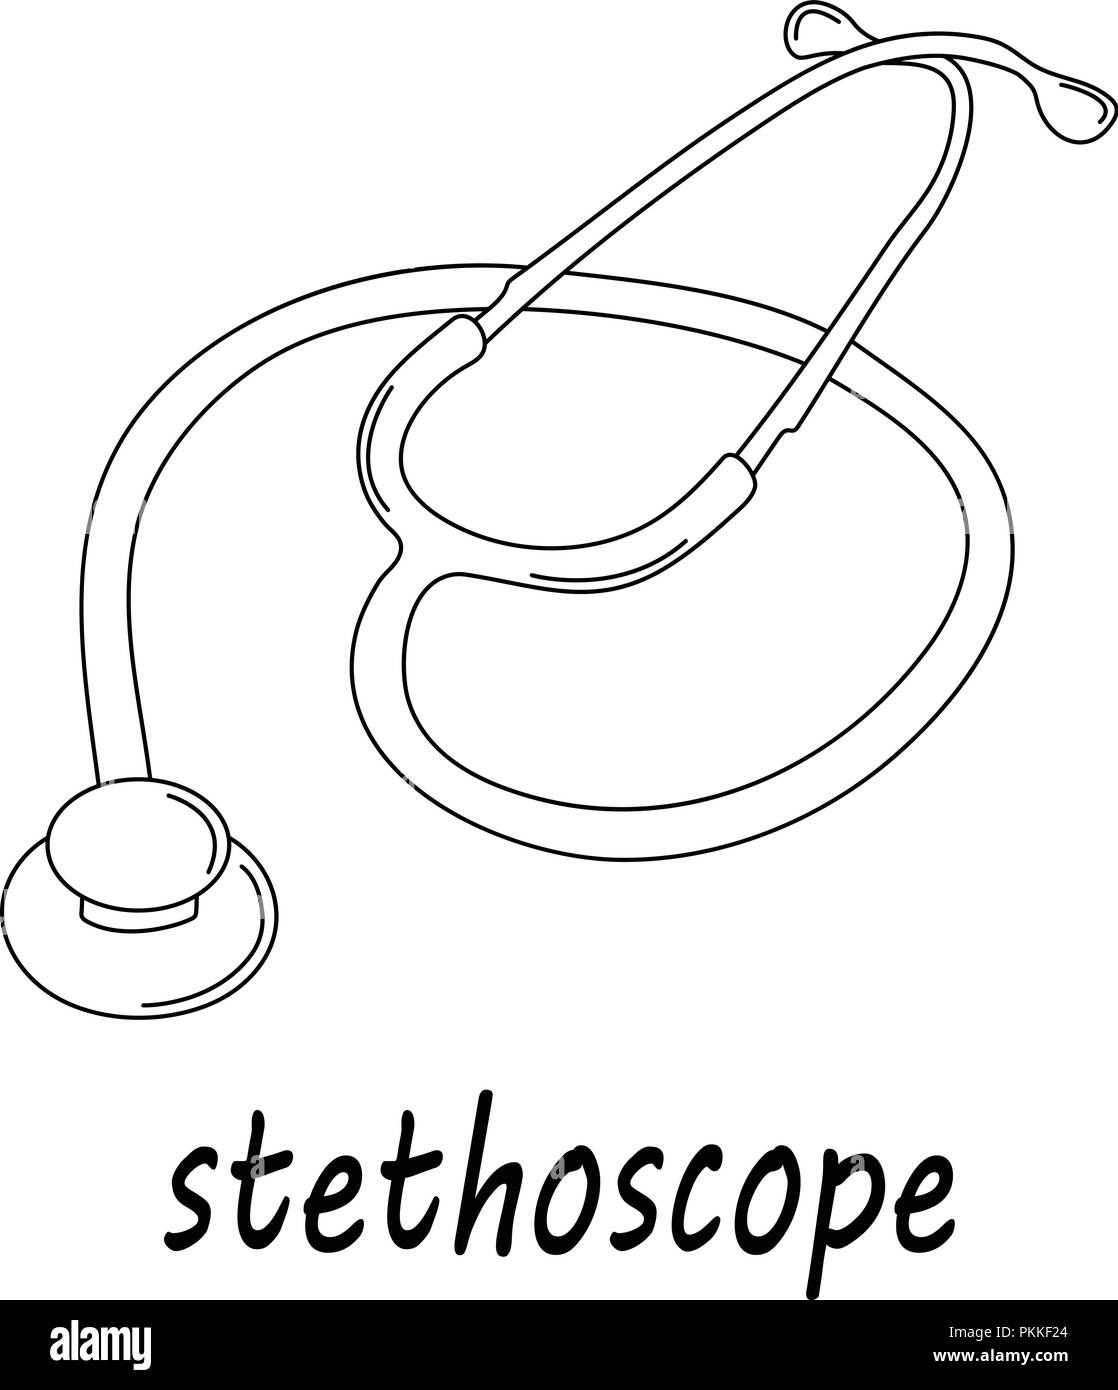 Vector illustration with a stethoscope. Medical illustration. Stock Vector